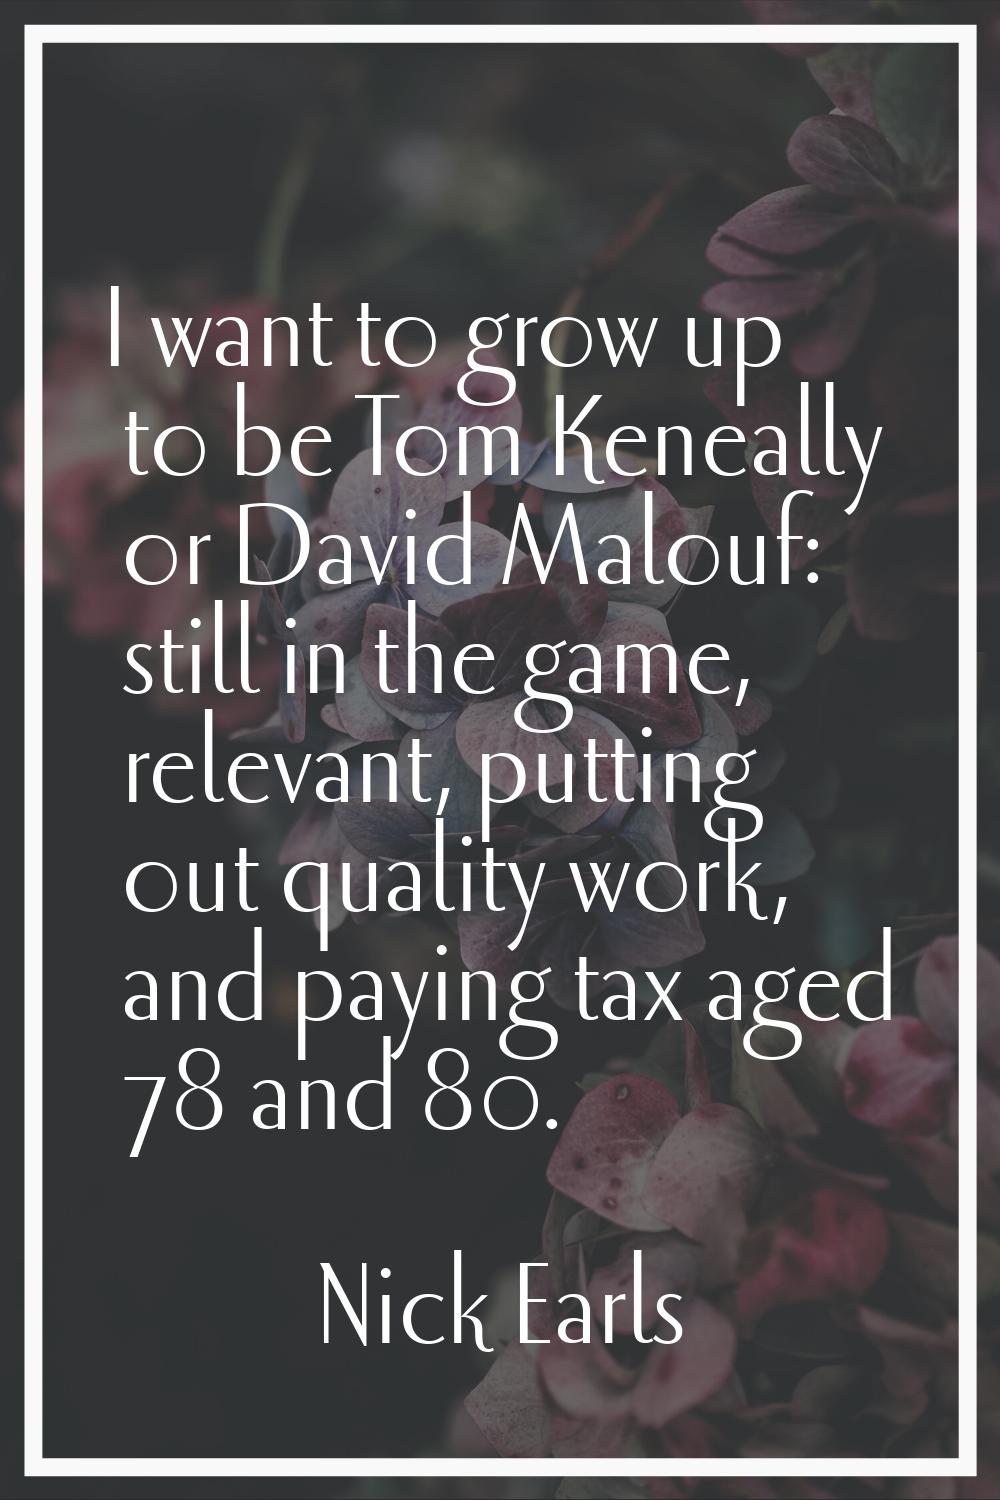 I want to grow up to be Tom Keneally or David Malouf: still in the game, relevant, putting out qual